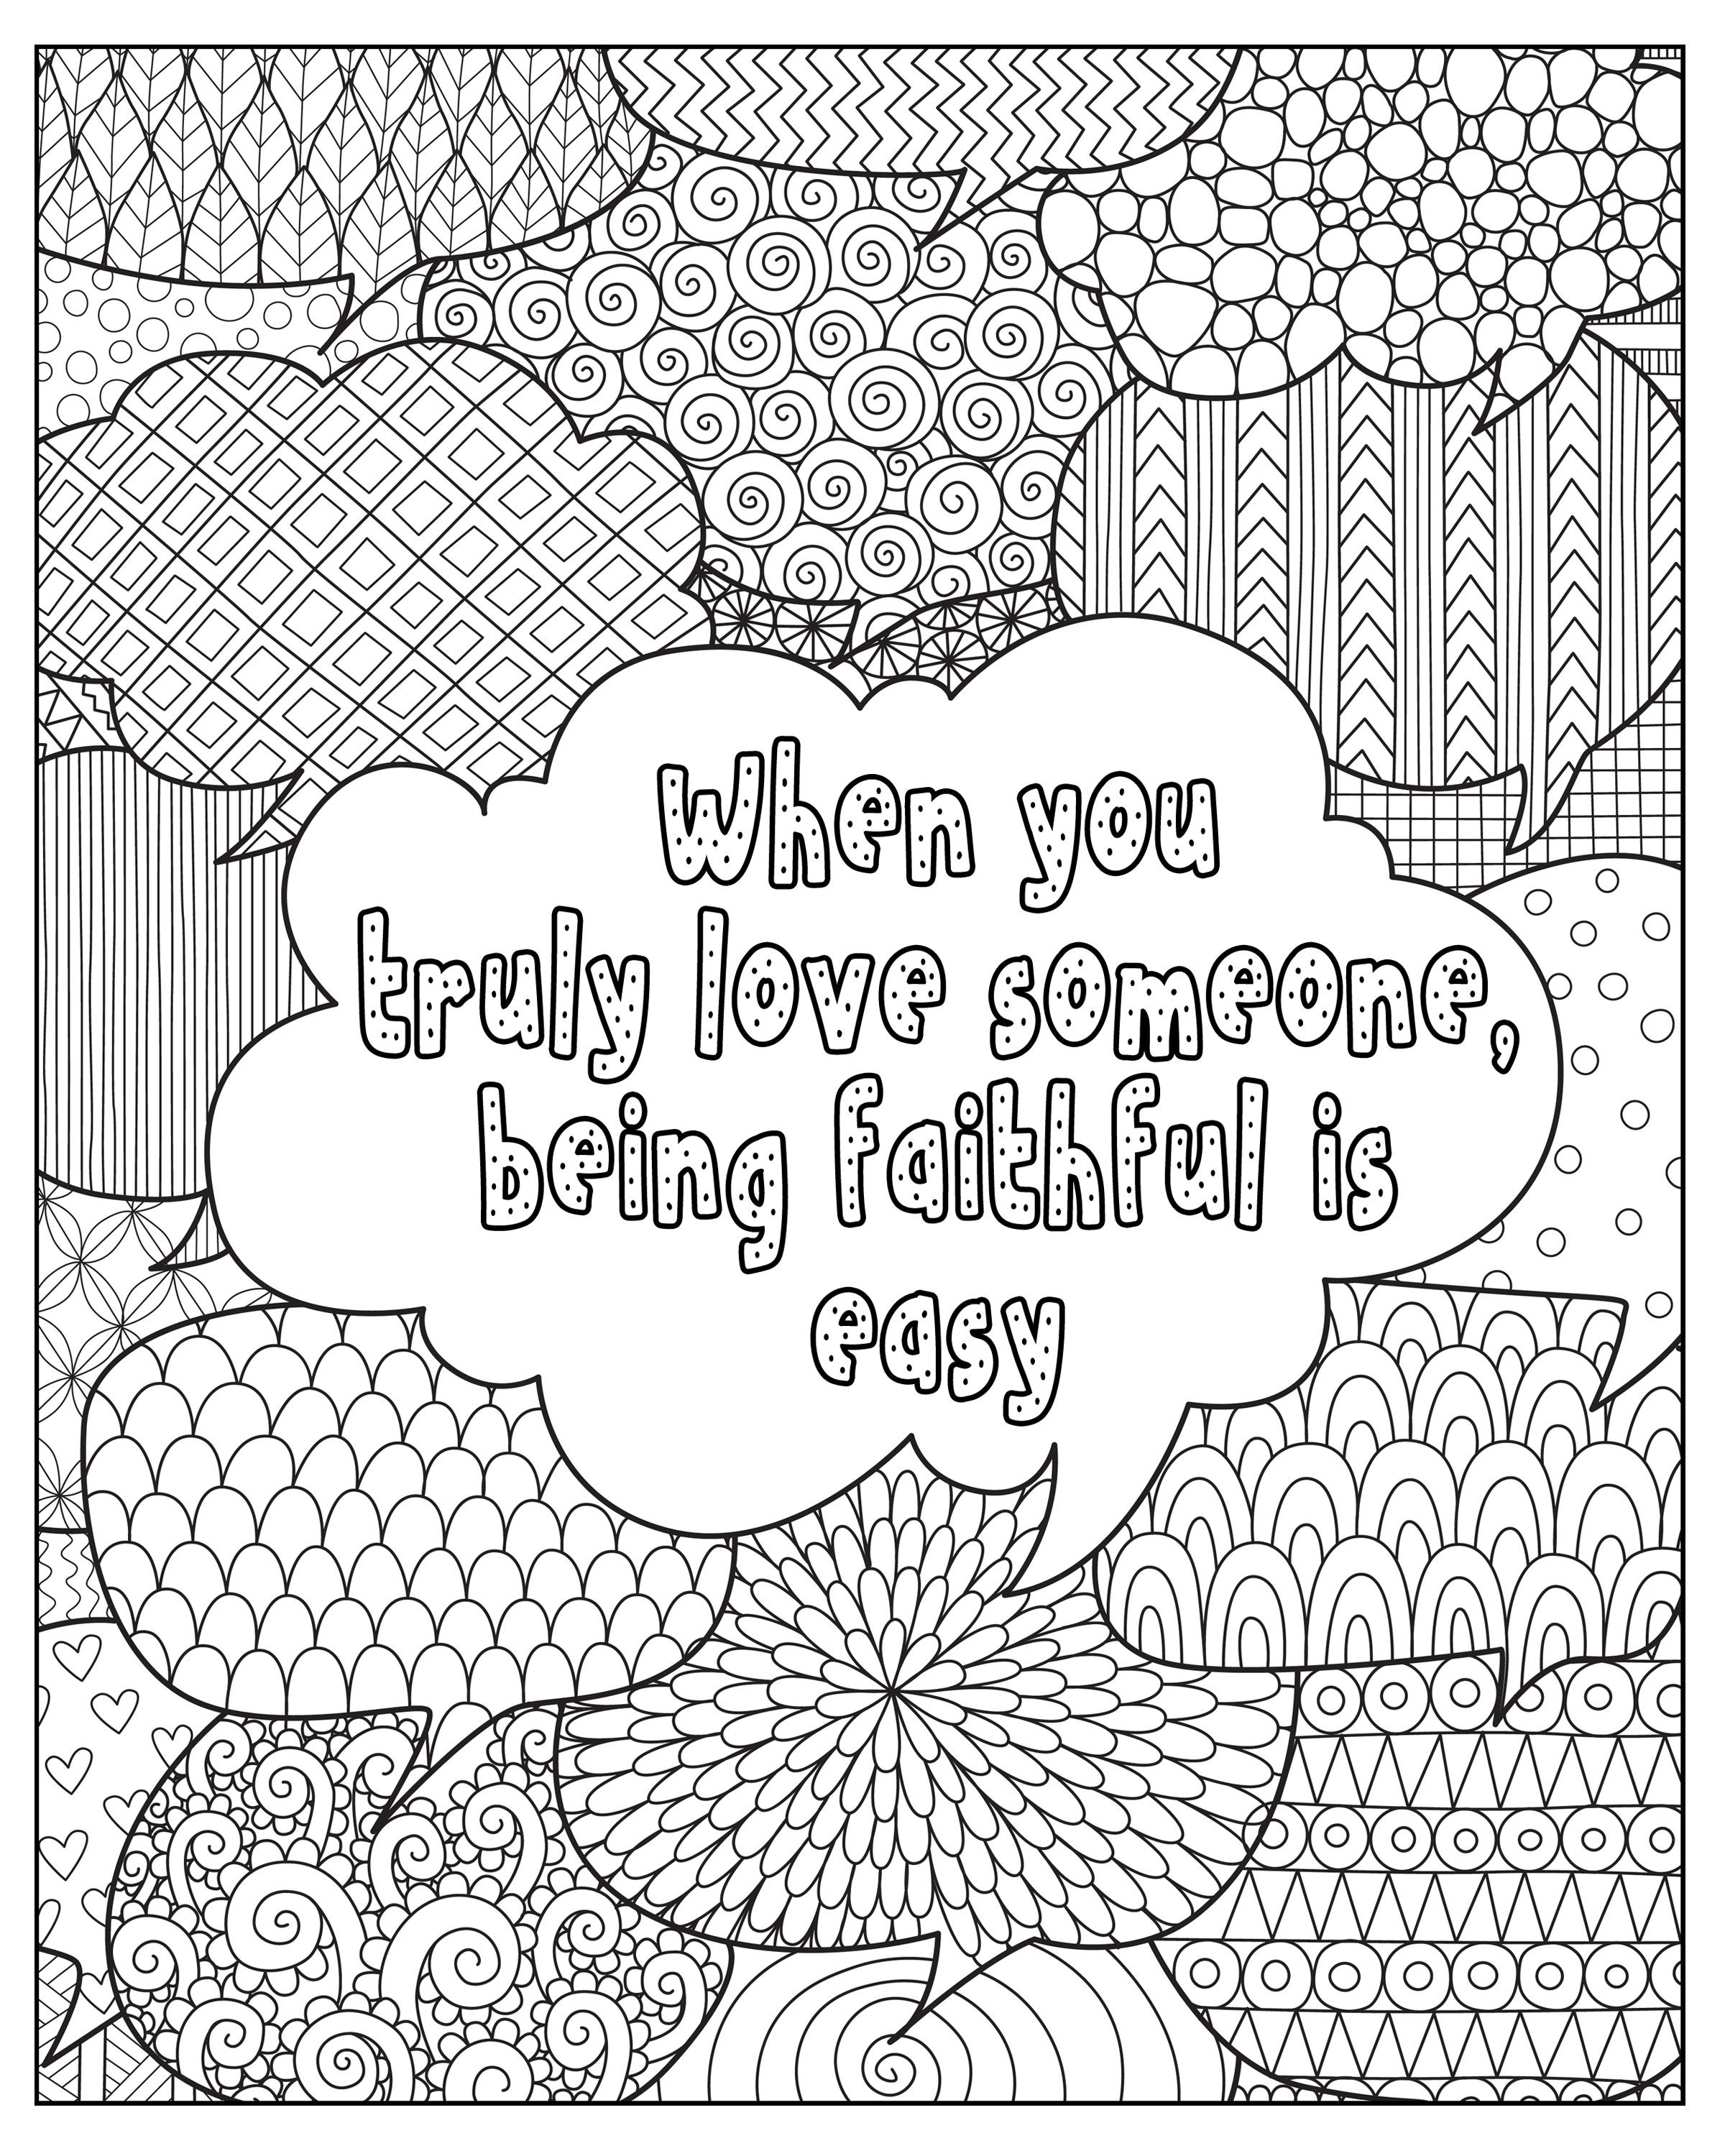 Inspirational Motivational Quotes Coloring Page Bundle for   Etsy